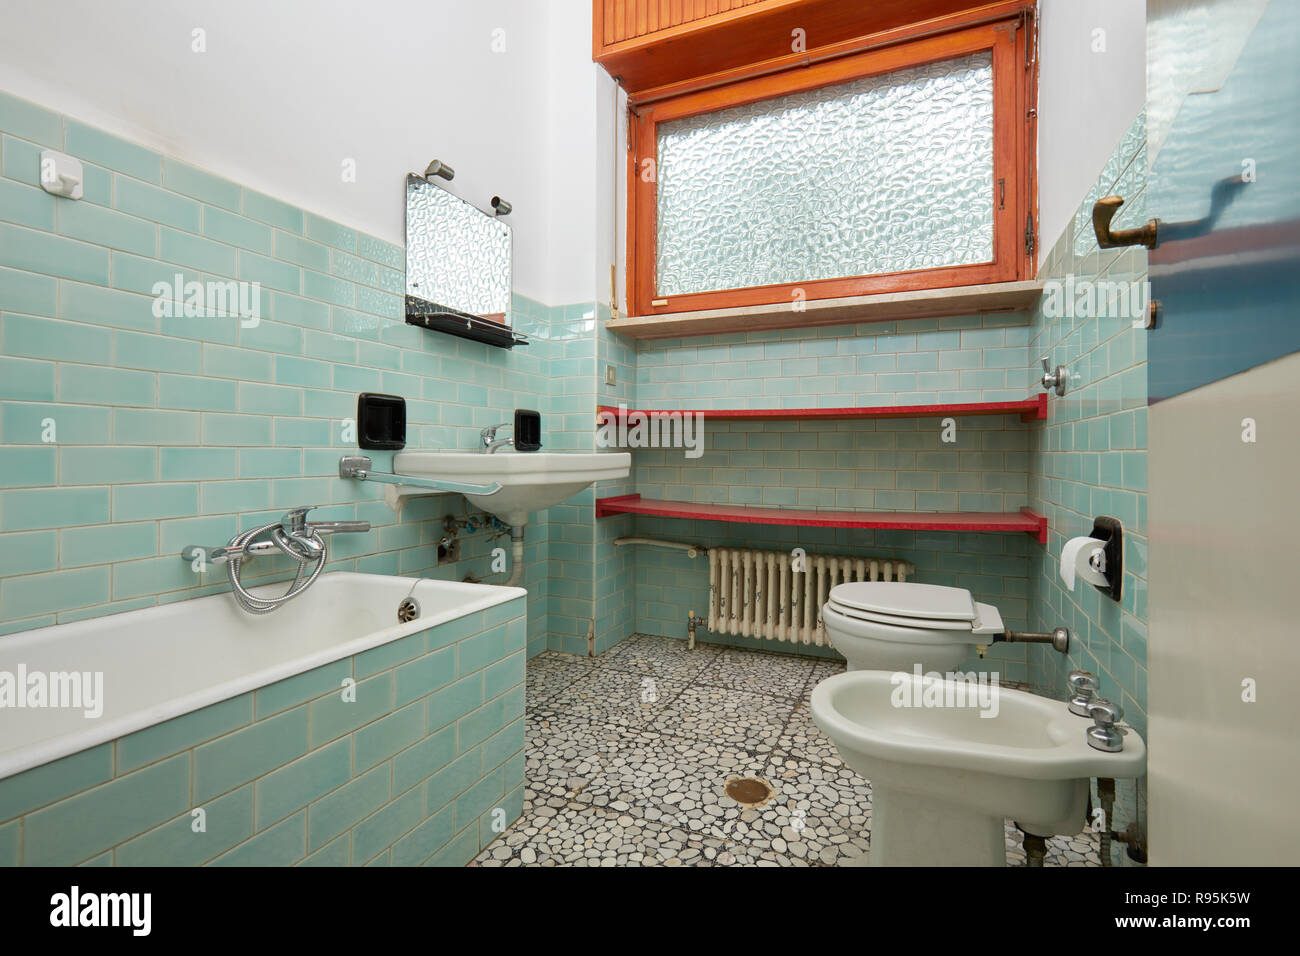 Normal bathroom in old apartment interior Stock Photo